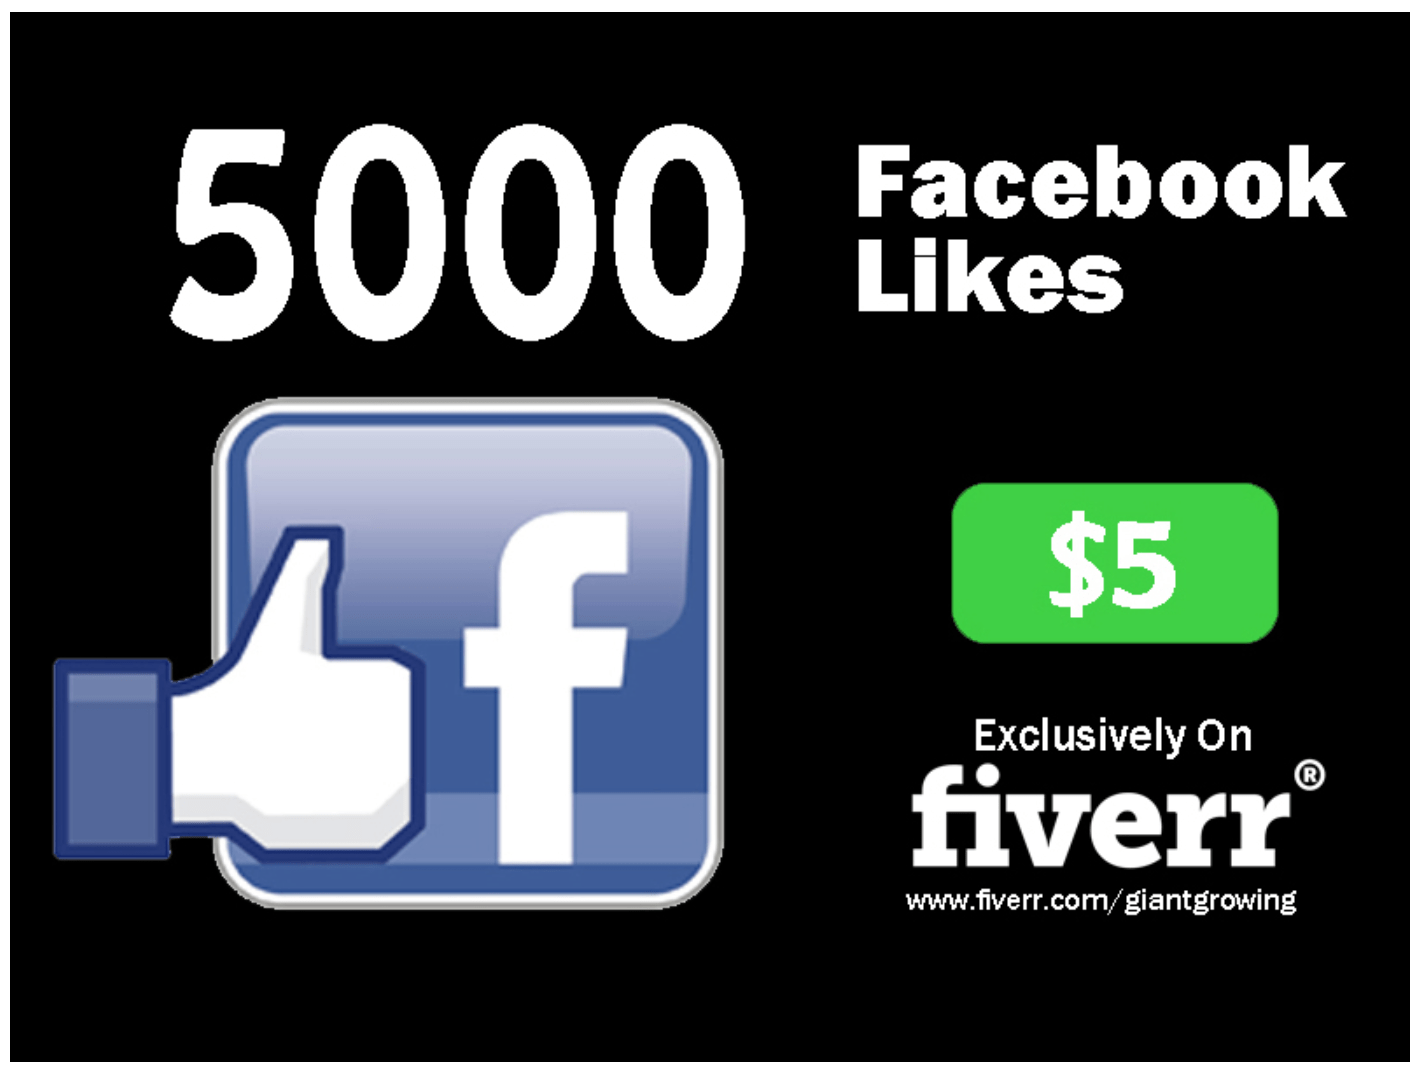 An ad for buying likes on Facebook.